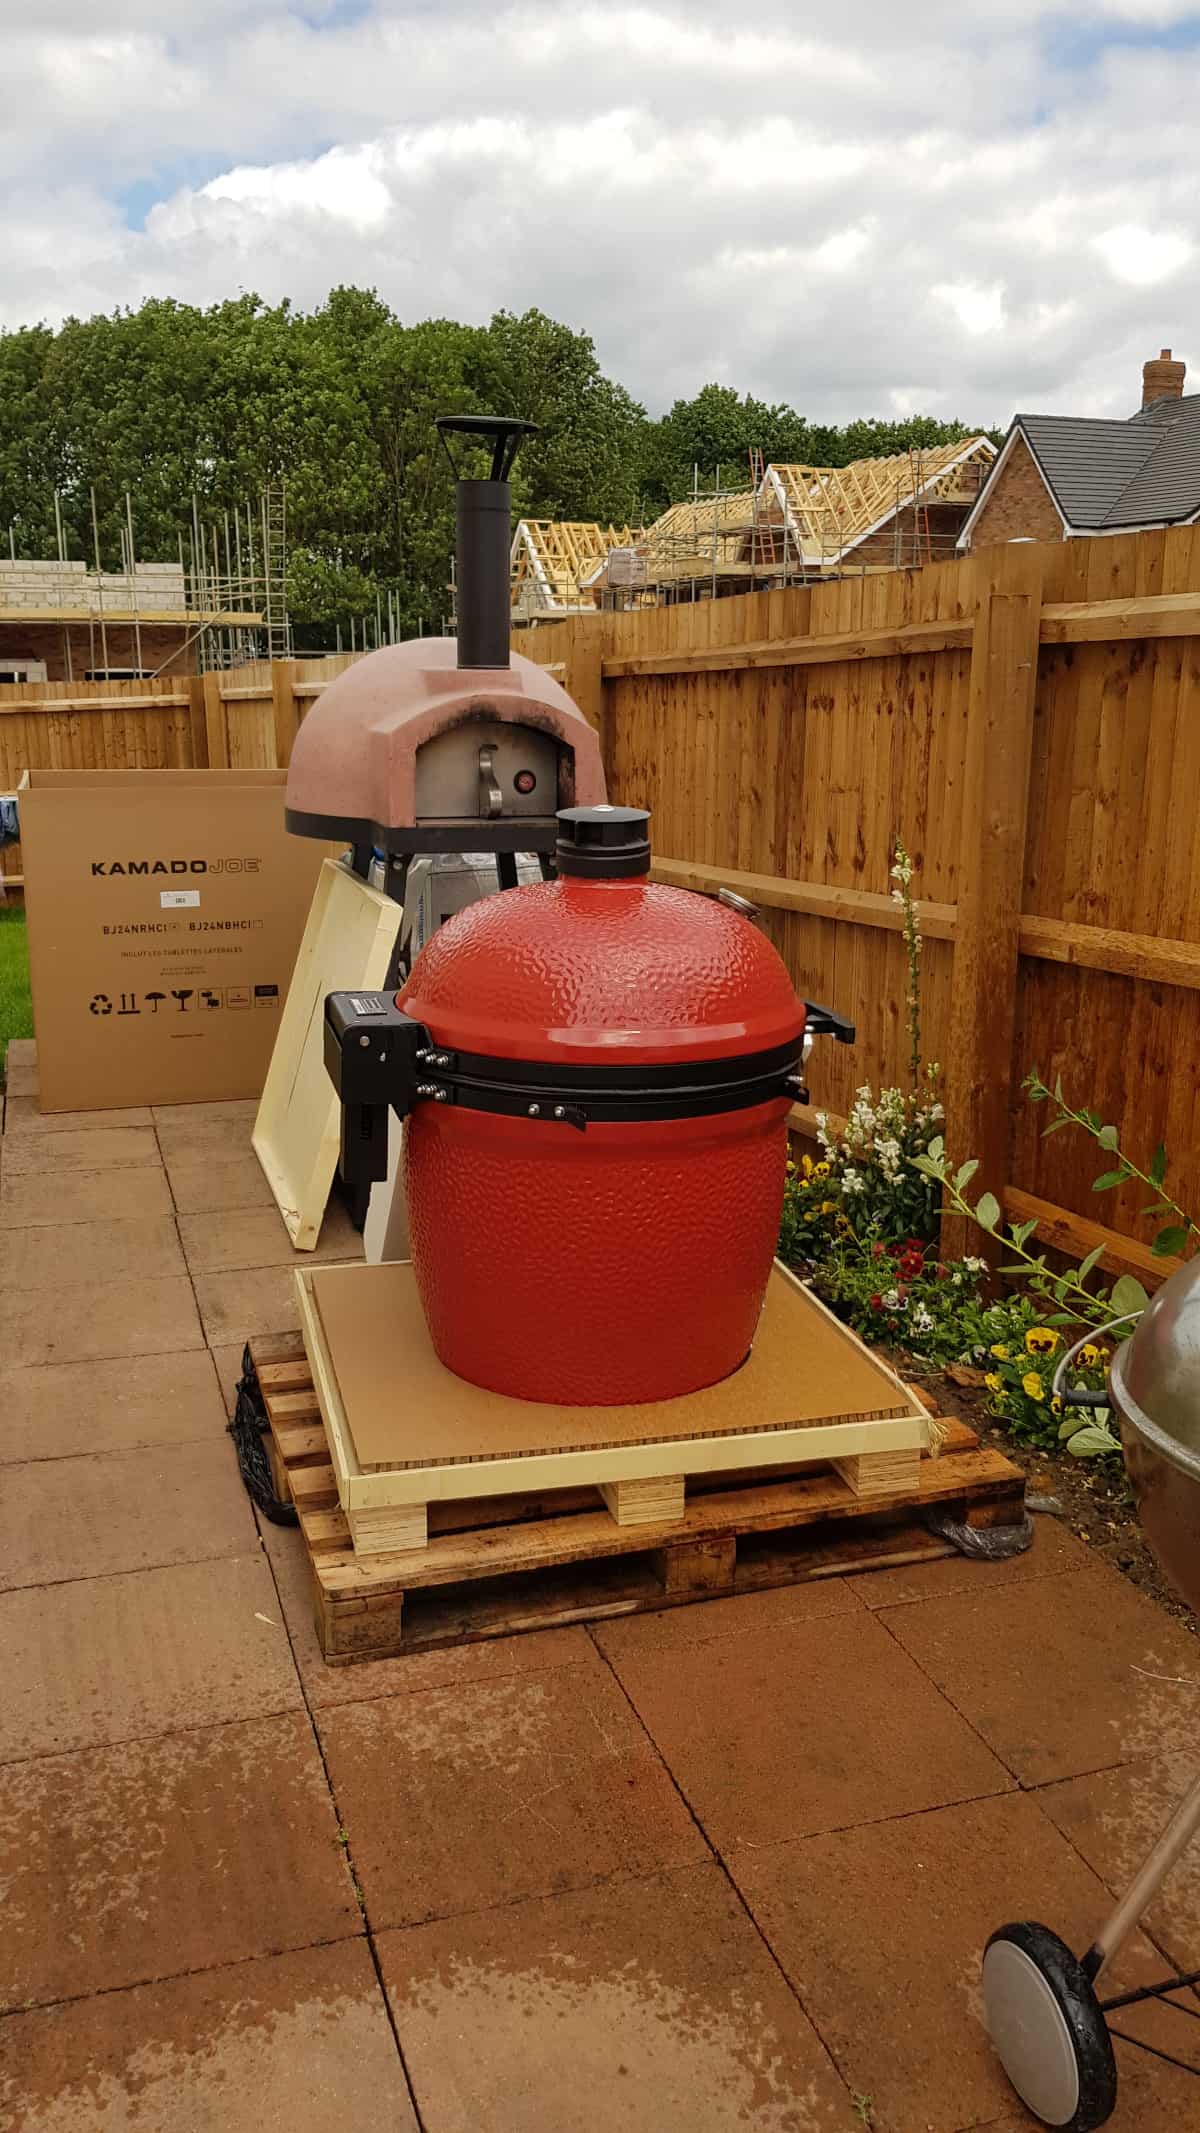 kamado joe big joe 3 larger pallet unboxed to reveal the grill body and lid.